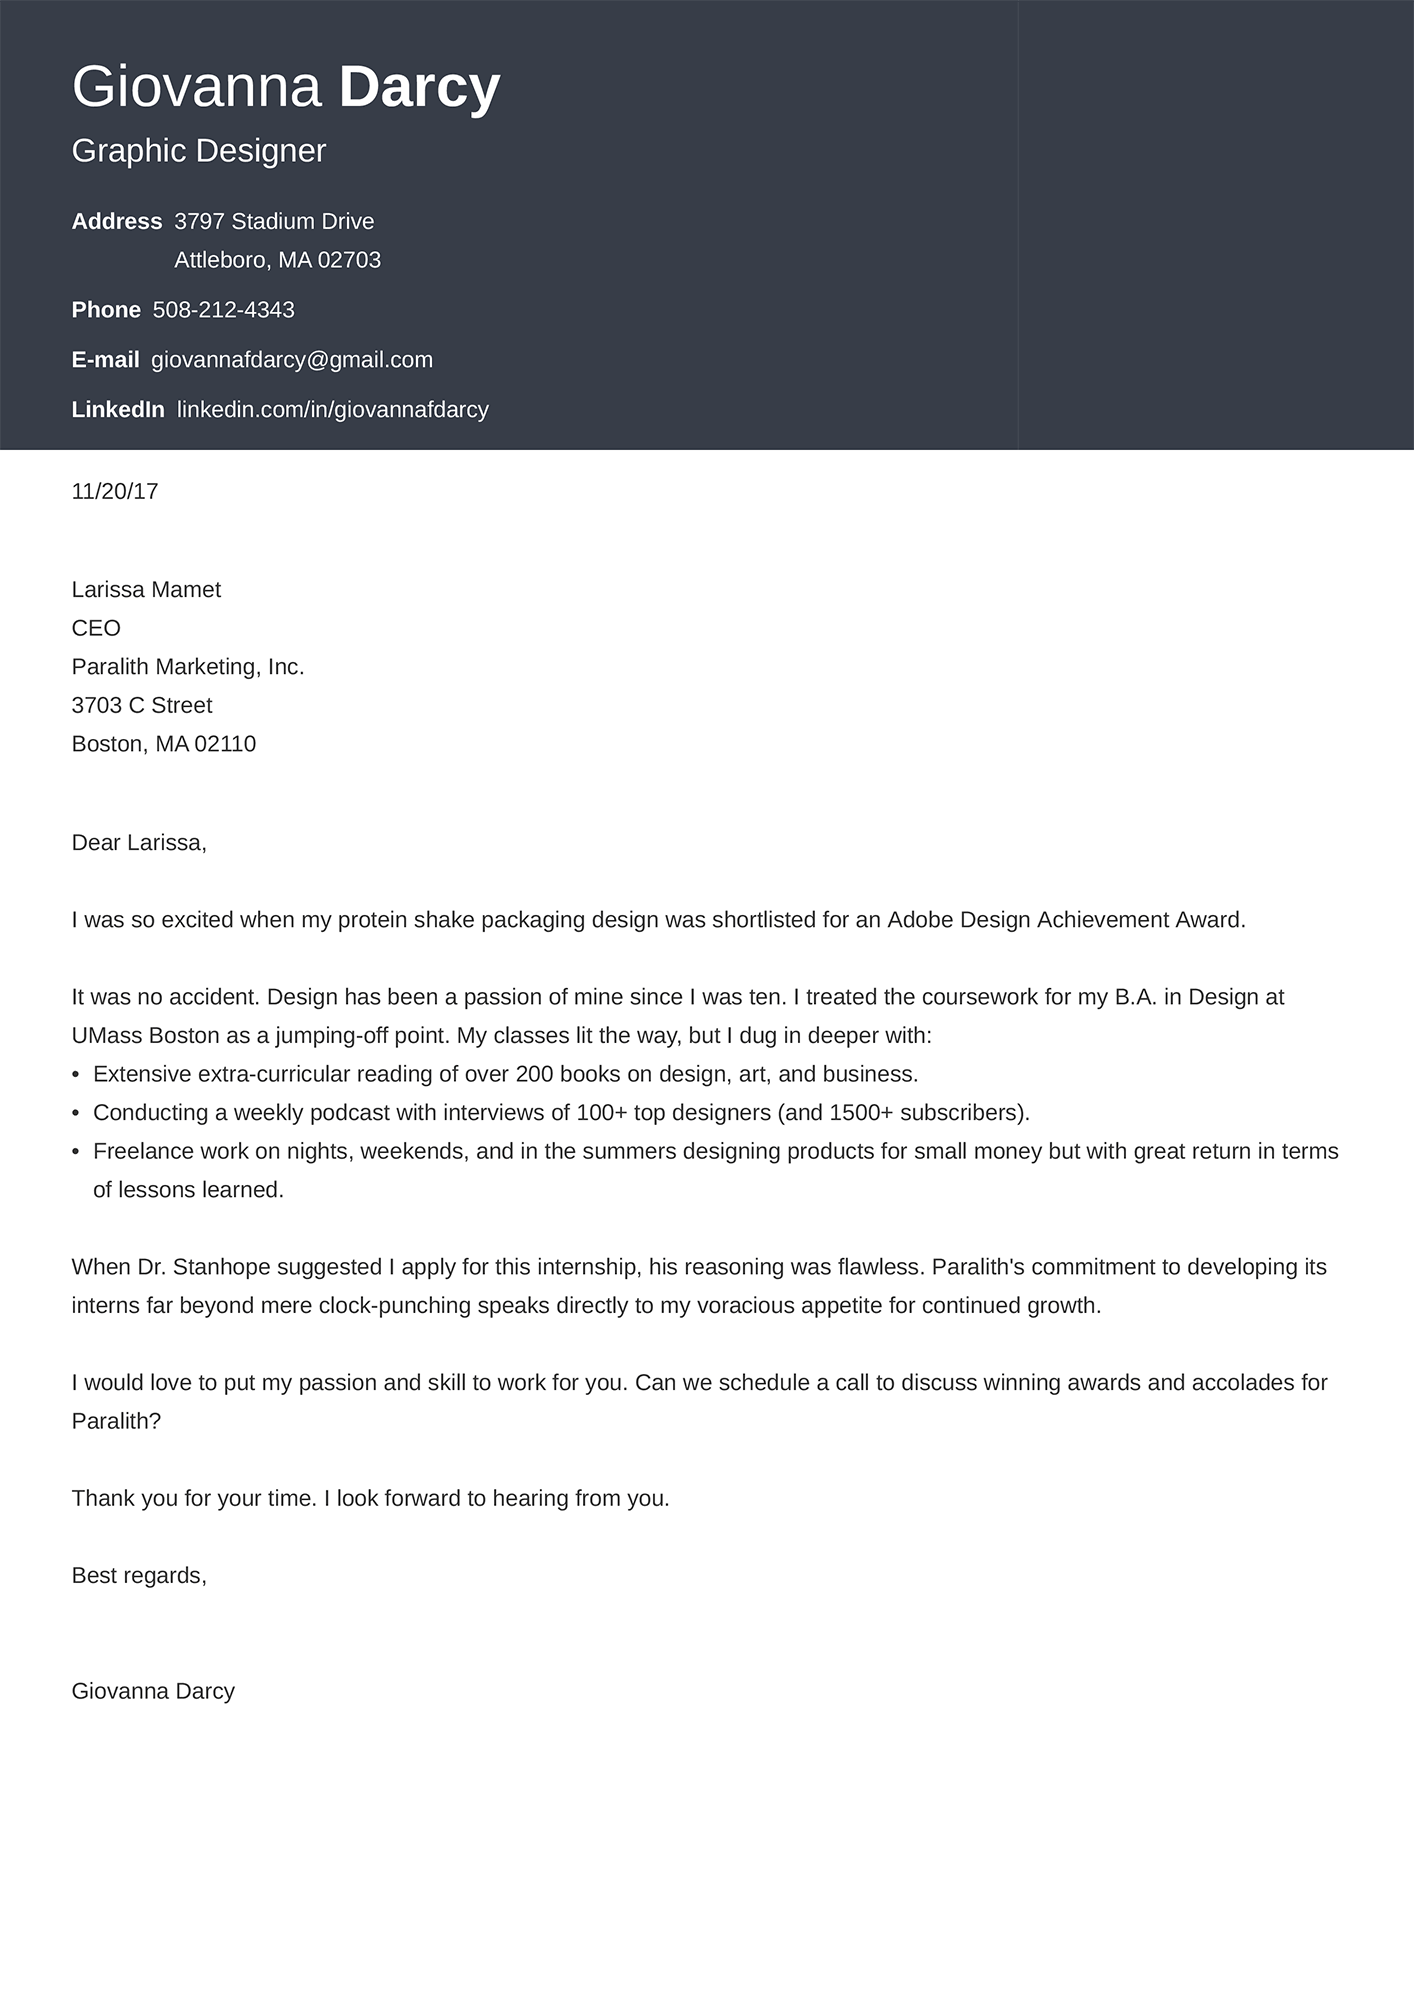 Letter For Application Job from cdn-images.zety.com